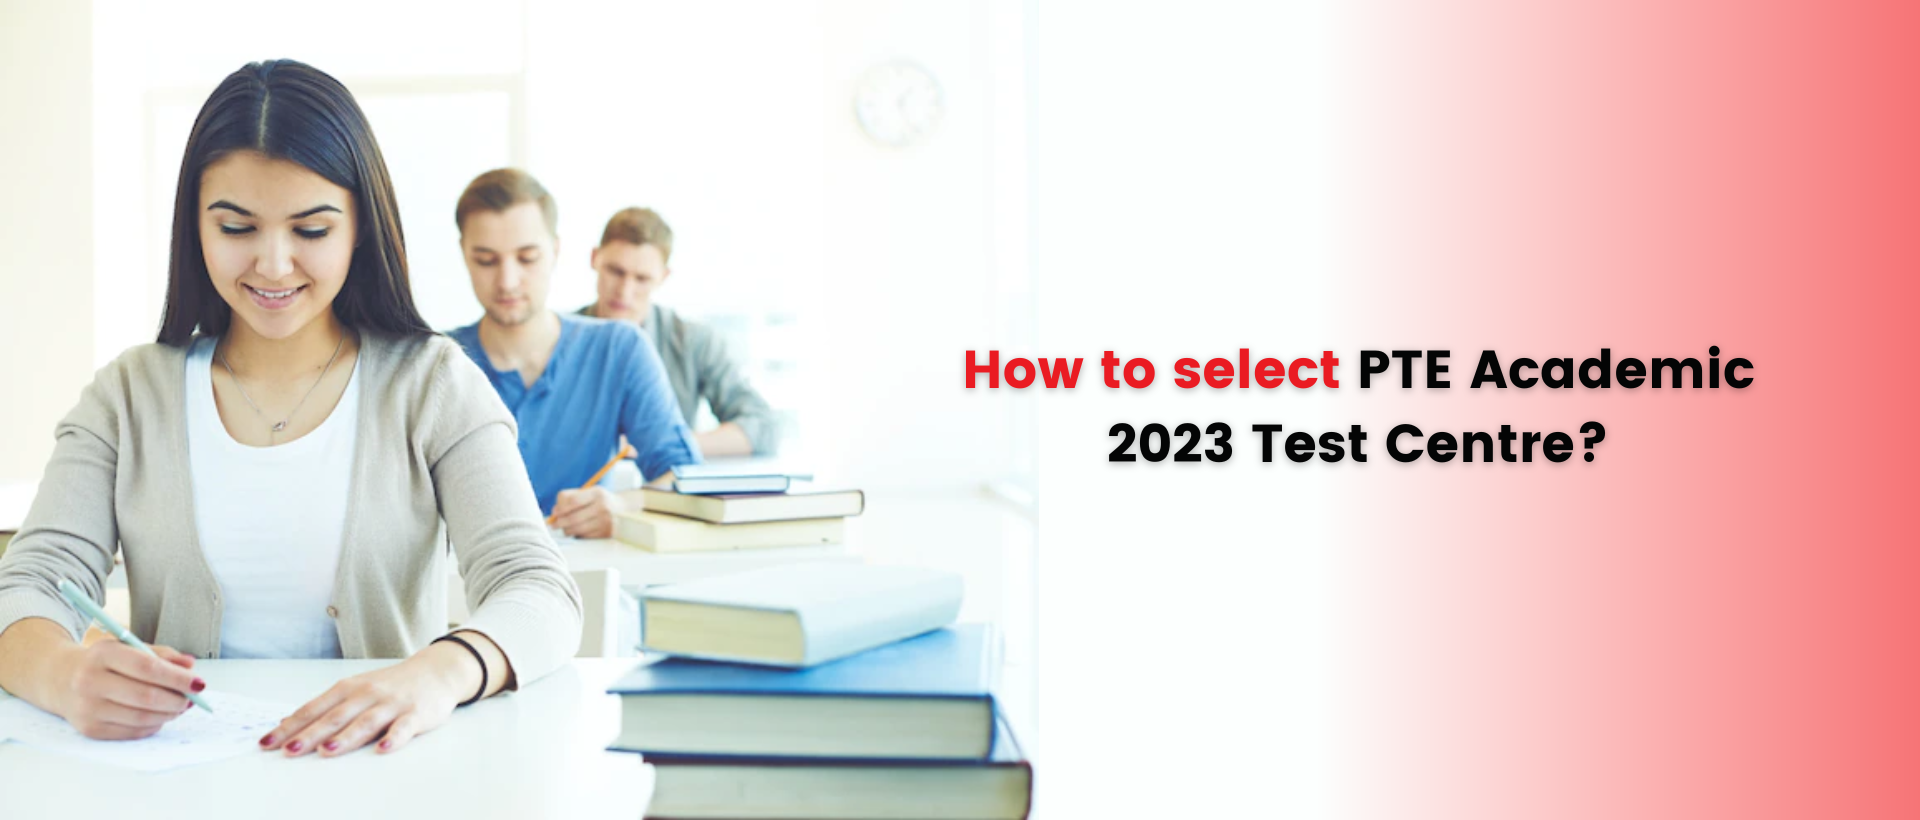 How to select pte academic 2023 test centre?